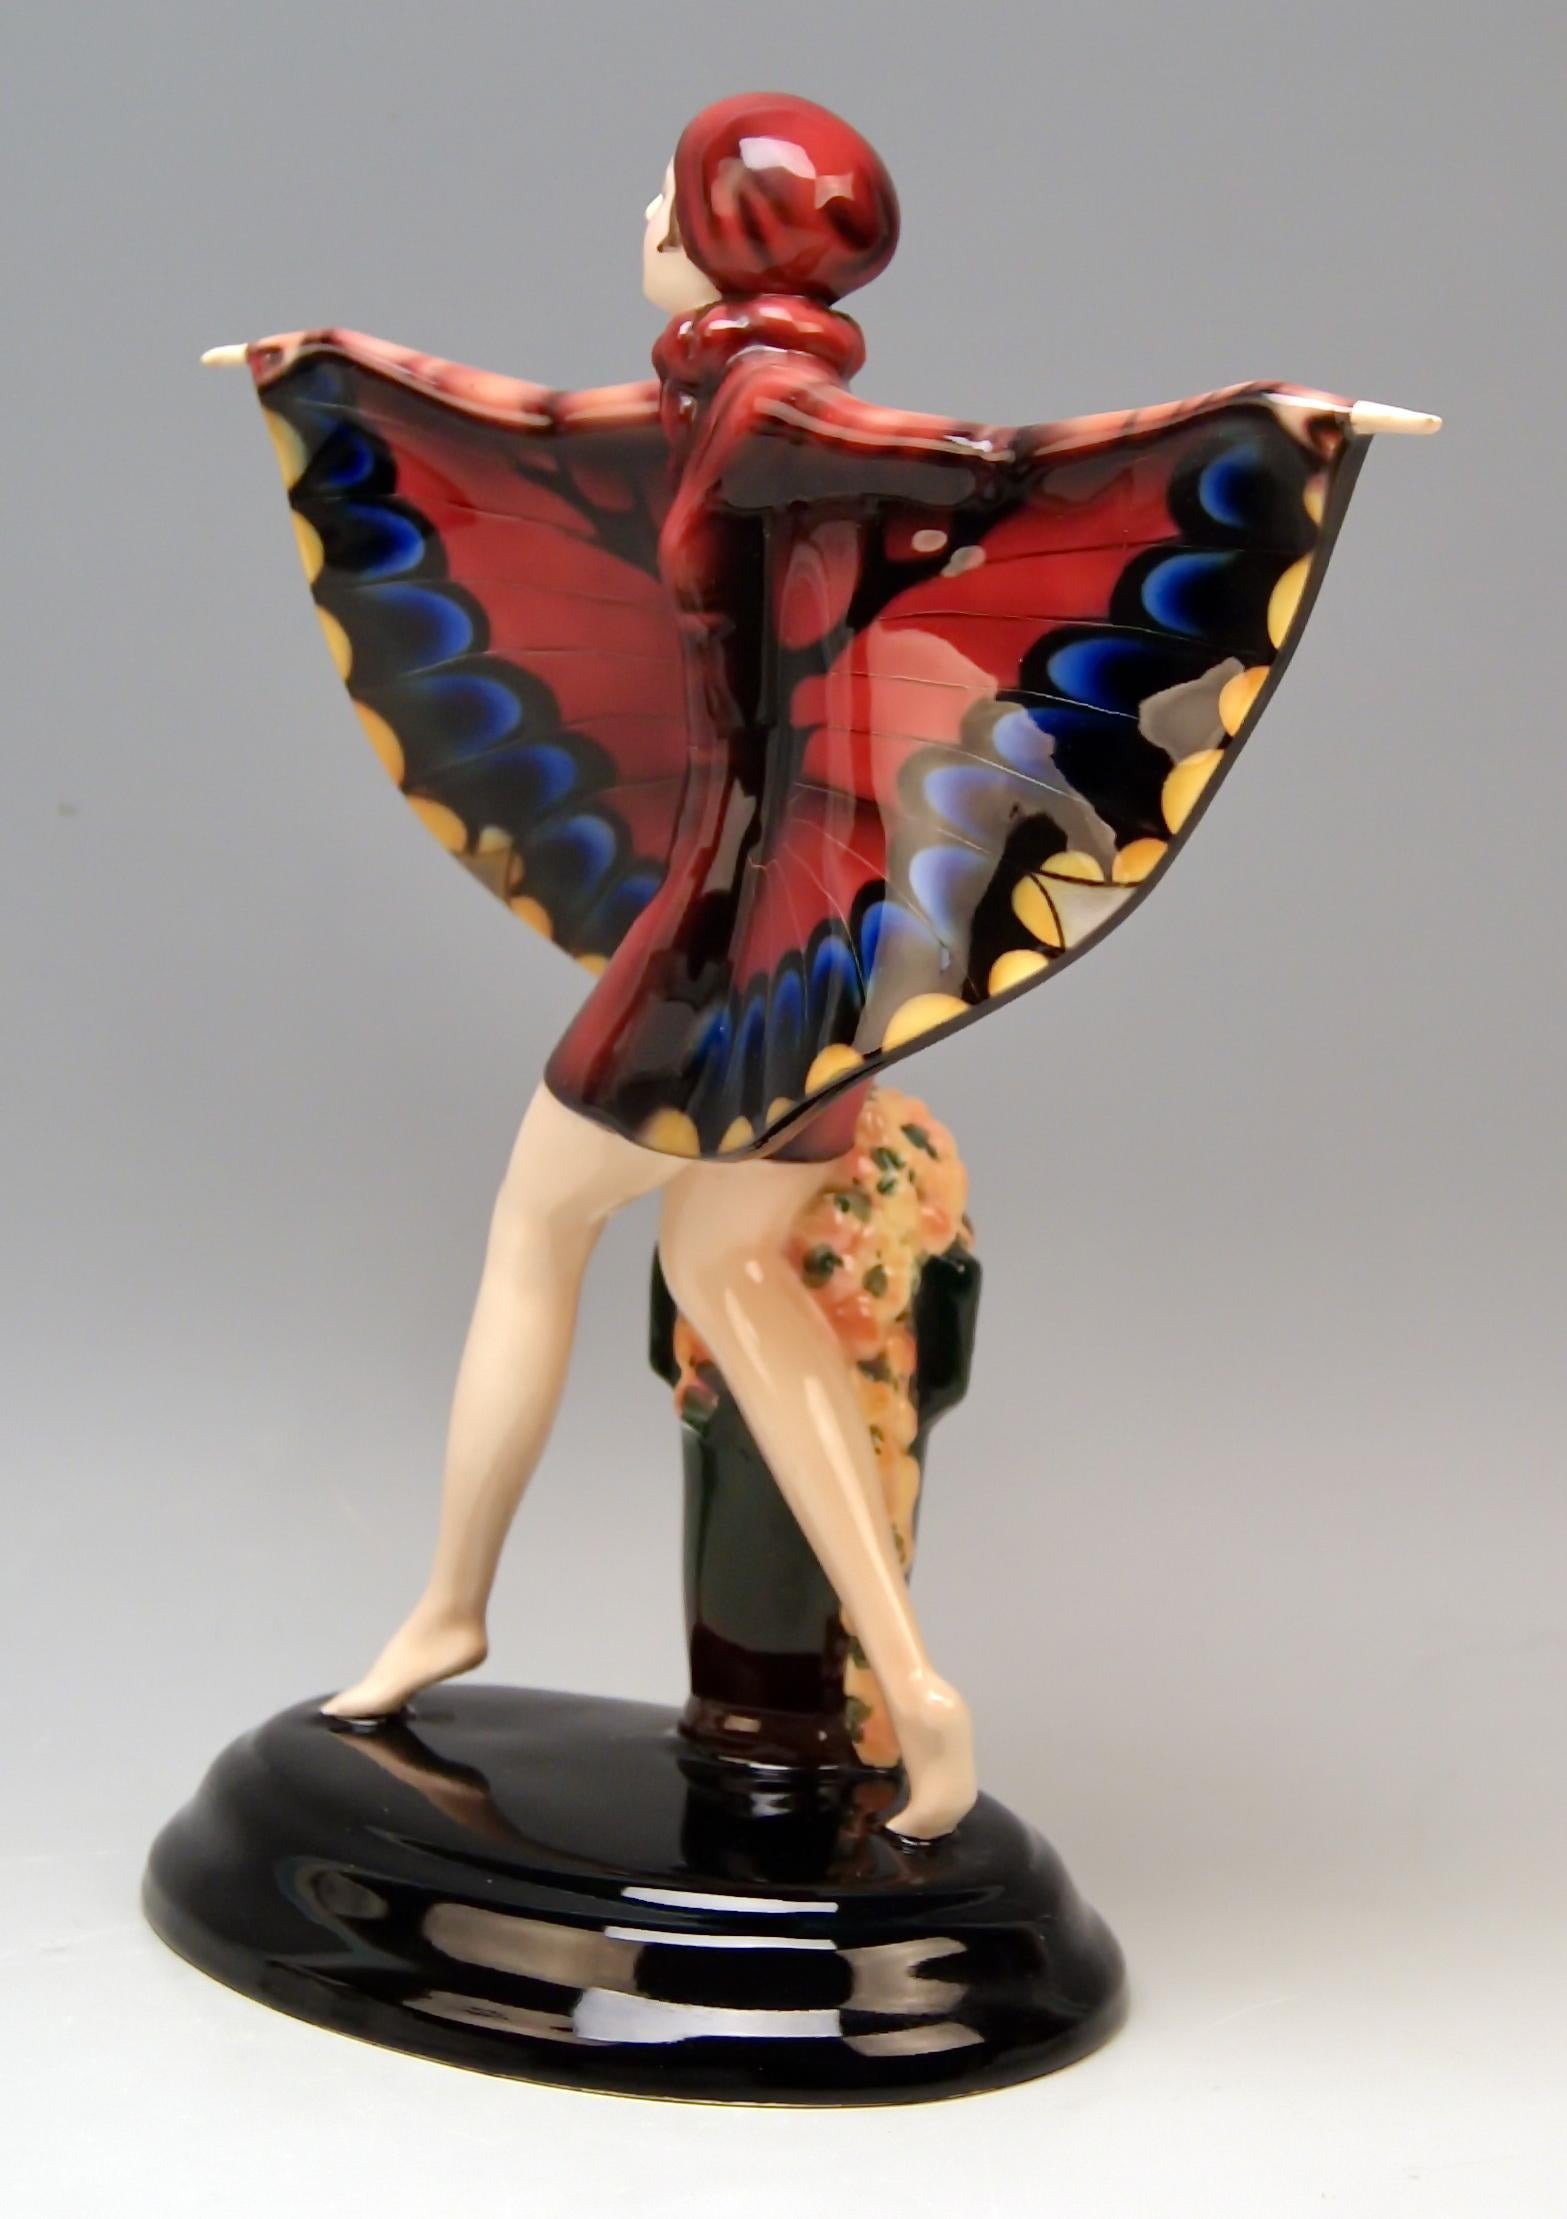 Goldscheider Vienna Gorgeous Dancingy Lady Figurine: The Captured Bird

Designed by Josef Lorenzl (1892 - 1950) / one of the most important designers having been active for Goldscheider manufactory in period of 1920 - 1940 / DESIGNED 1922 (= QUITE